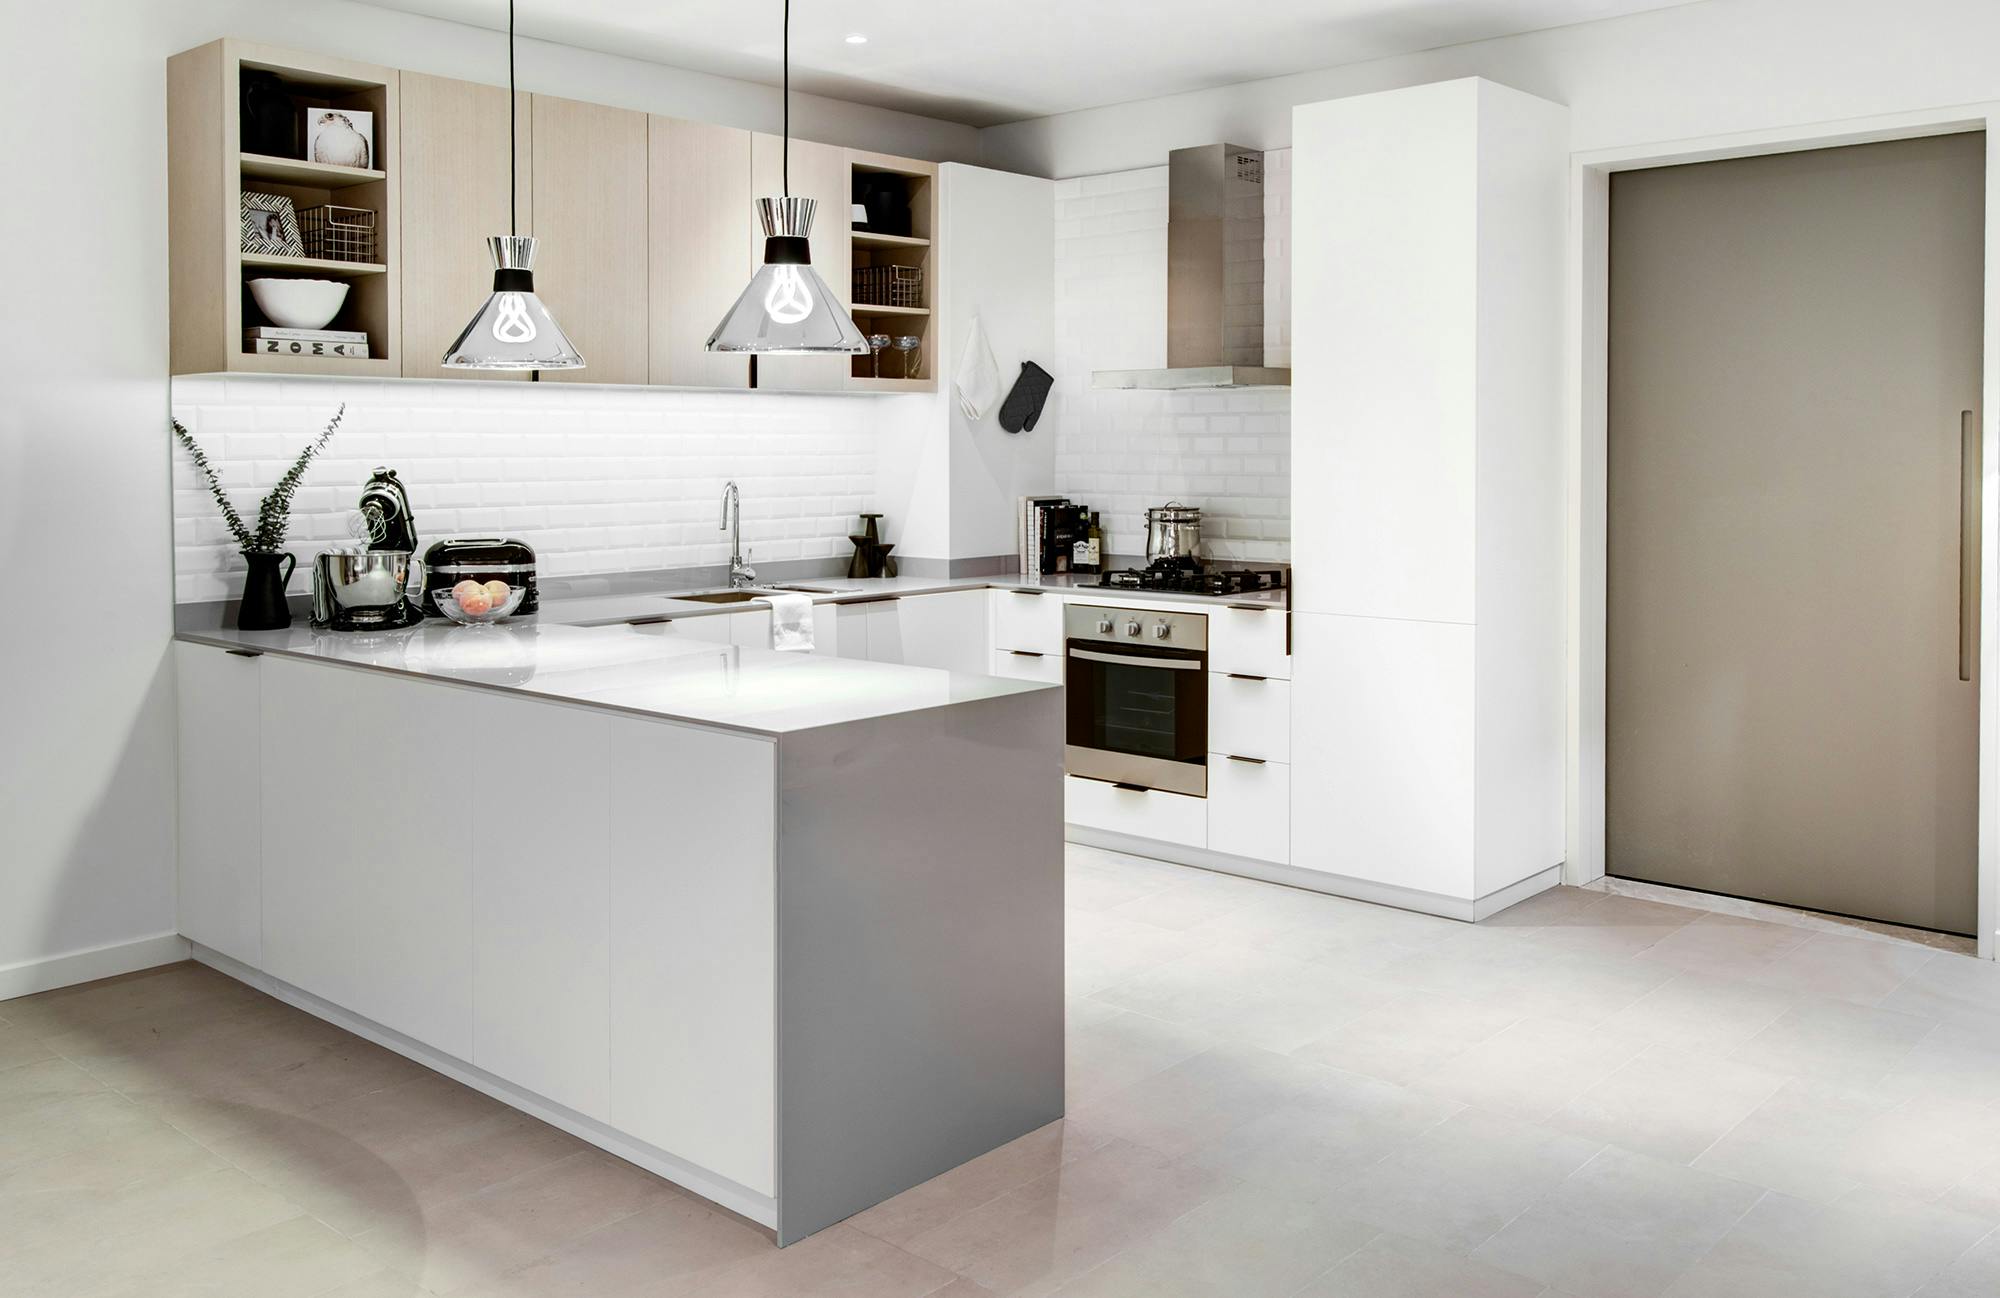 Numéro d'image 34 de la section actuelle de Dekton Sirius adds a welcoming touch to the kitchens of a residential development in Dubai de Cosentino France